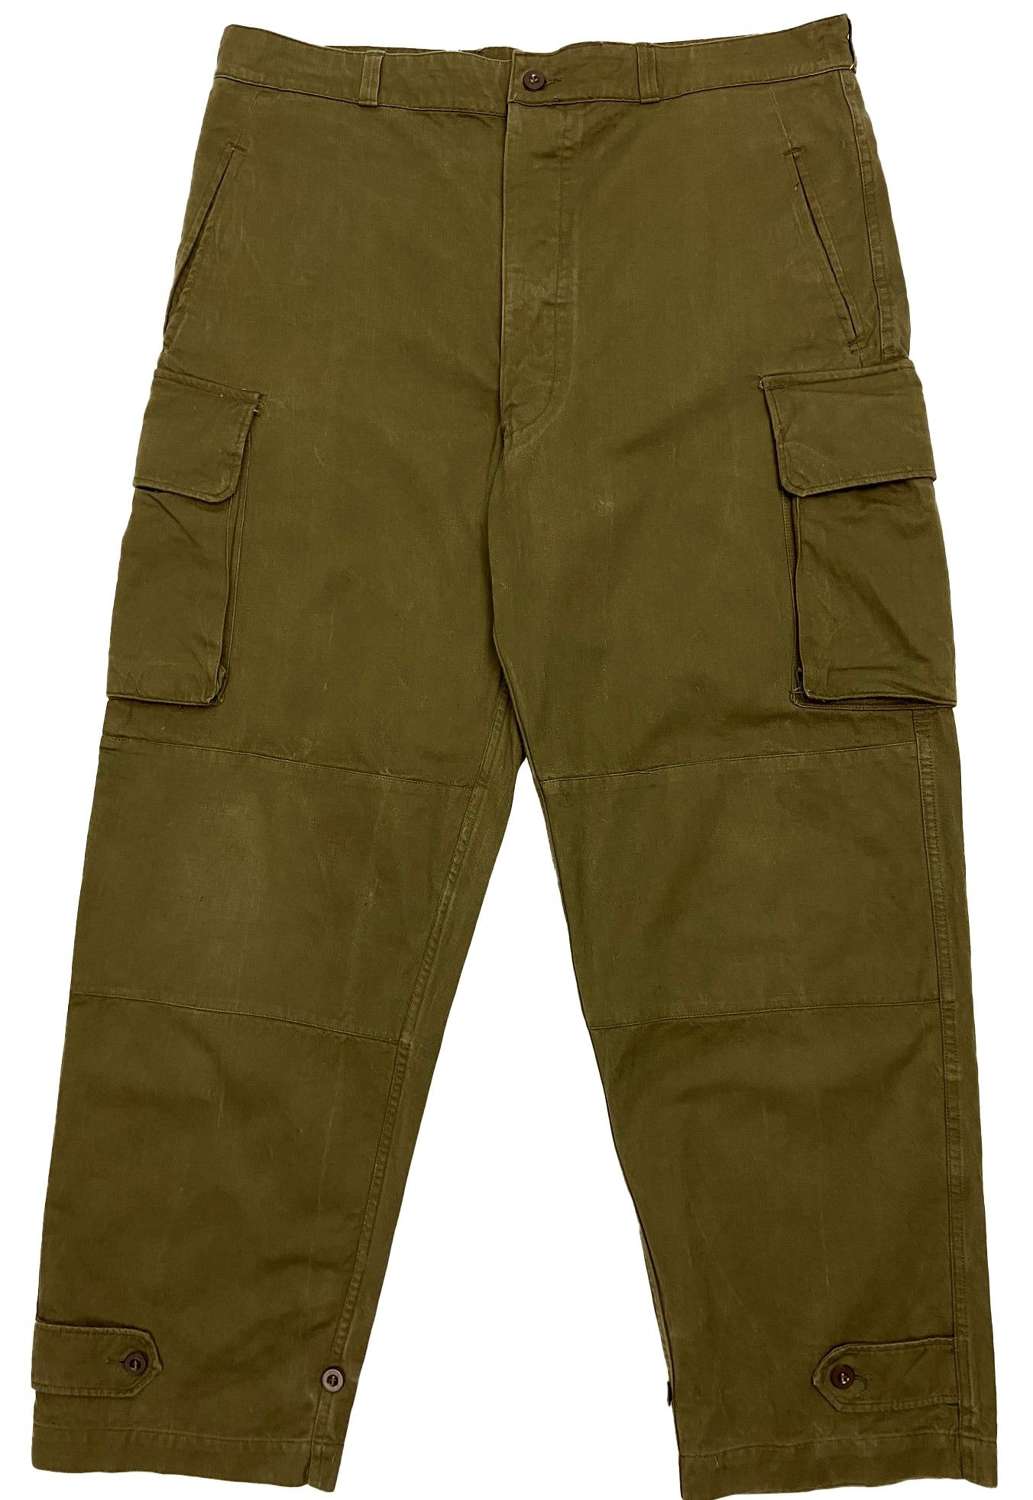 Original 1950s French Army M47 Trousers